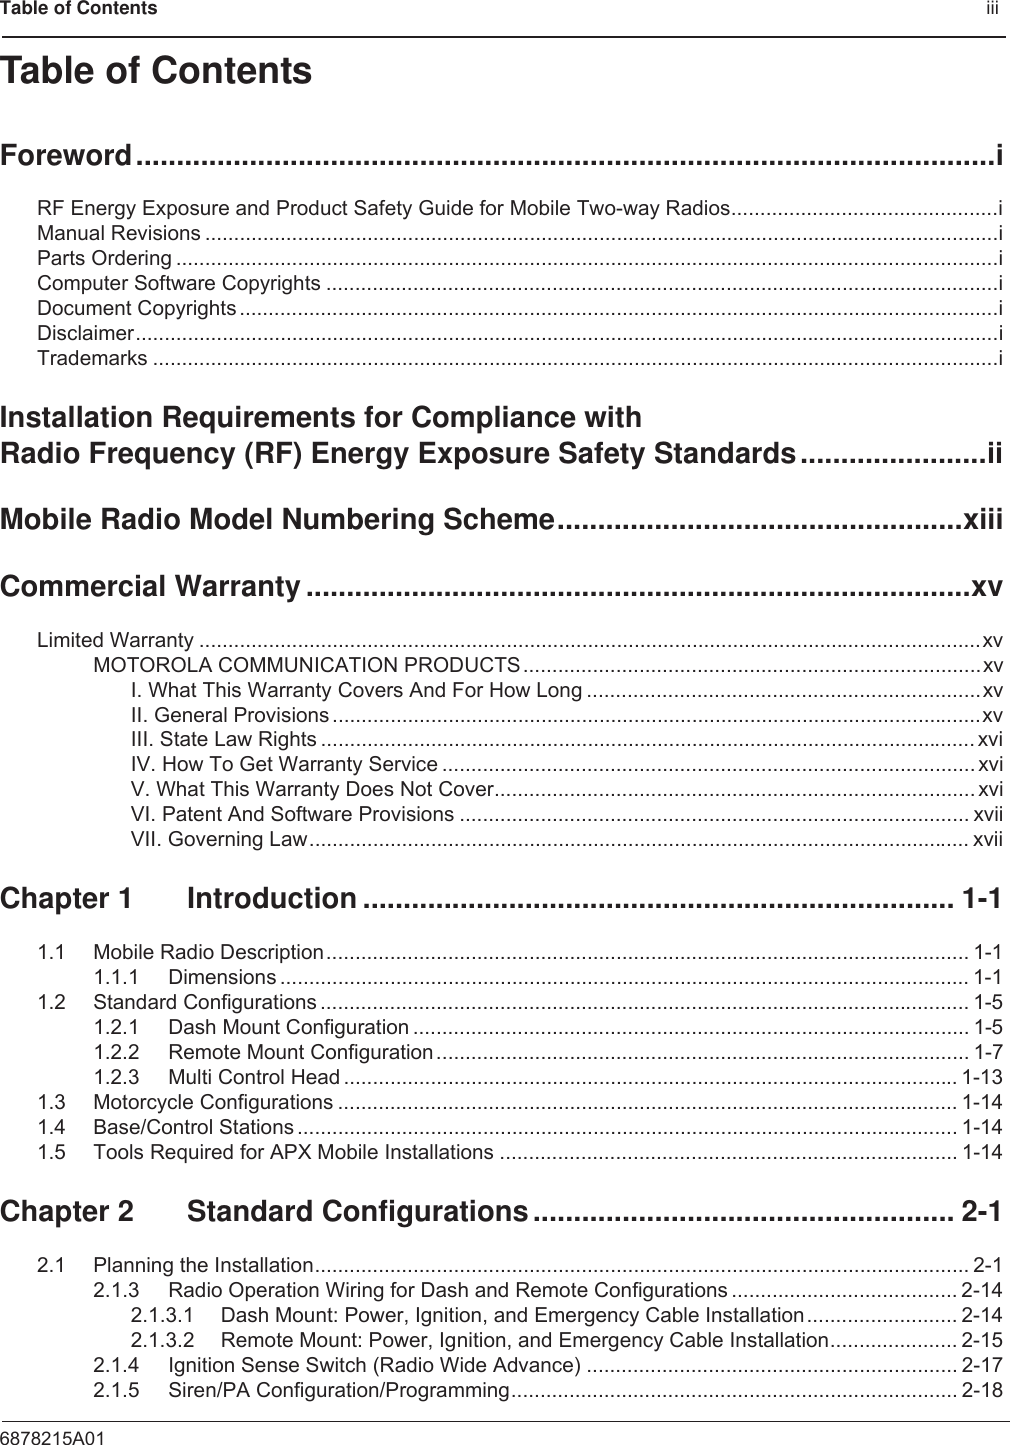 Table of Contents                                                                                              iii6878215A01Table of ContentsForeword..........................................................................................................iRF Energy Exposure and Product Safety Guide for Mobile Two-way Radios..............................................iManual Revisions .........................................................................................................................................iParts Ordering ..............................................................................................................................................iComputer Software Copyrights ....................................................................................................................iDocument Copyrights ...................................................................................................................................iDisclaimer.....................................................................................................................................................iTrademarks ..................................................................................................................................................iInstallation Requirements for Compliance withRadio Frequency (RF) Energy Exposure Safety Standards.......................iiMobile Radio Model Numbering Scheme..................................................xiiiCommercial Warranty ..................................................................................xvLimited Warranty .......................................................................................................................................xvMOTOROLA COMMUNICATION PRODUCTS...............................................................................xvI. What This Warranty Covers And For How Long ....................................................................xvII. General Provisions ................................................................................................................xvIII. State Law Rights ................................................................................................................. xviIV. How To Get Warranty Service ............................................................................................ xviV. What This Warranty Does Not Cover................................................................................... xviVI. Patent And Software Provisions ........................................................................................ xviiVII. Governing Law.................................................................................................................. xviiChapter 1 Introduction ......................................................................... 1-11.1 Mobile Radio Description............................................................................................................... 1-11.1.1 Dimensions ....................................................................................................................... 1-11.2 Standard Configurations ................................................................................................................ 1-51.2.1 Dash Mount Configuration ................................................................................................ 1-51.2.2 Remote Mount Configuration............................................................................................ 1-71.2.3 Multi Control Head .......................................................................................................... 1-131.3 Motorcycle Configurations ........................................................................................................... 1-141.4 Base/Control Stations .................................................................................................................. 1-141.5 Tools Required for APX Mobile Installations ............................................................................... 1-14Chapter 2 Standard Configurations.................................................... 2-12.1 Planning the Installation................................................................................................................. 2-12.1.3 Radio Operation Wiring for Dash and Remote Configurations ....................................... 2-142.1.3.1 Dash Mount: Power, Ignition, and Emergency Cable Installation.......................... 2-142.1.3.2 Remote Mount: Power, Ignition, and Emergency Cable Installation...................... 2-152.1.4 Ignition Sense Switch (Radio Wide Advance) ................................................................ 2-172.1.5 Siren/PA Configuration/Programming............................................................................. 2-18